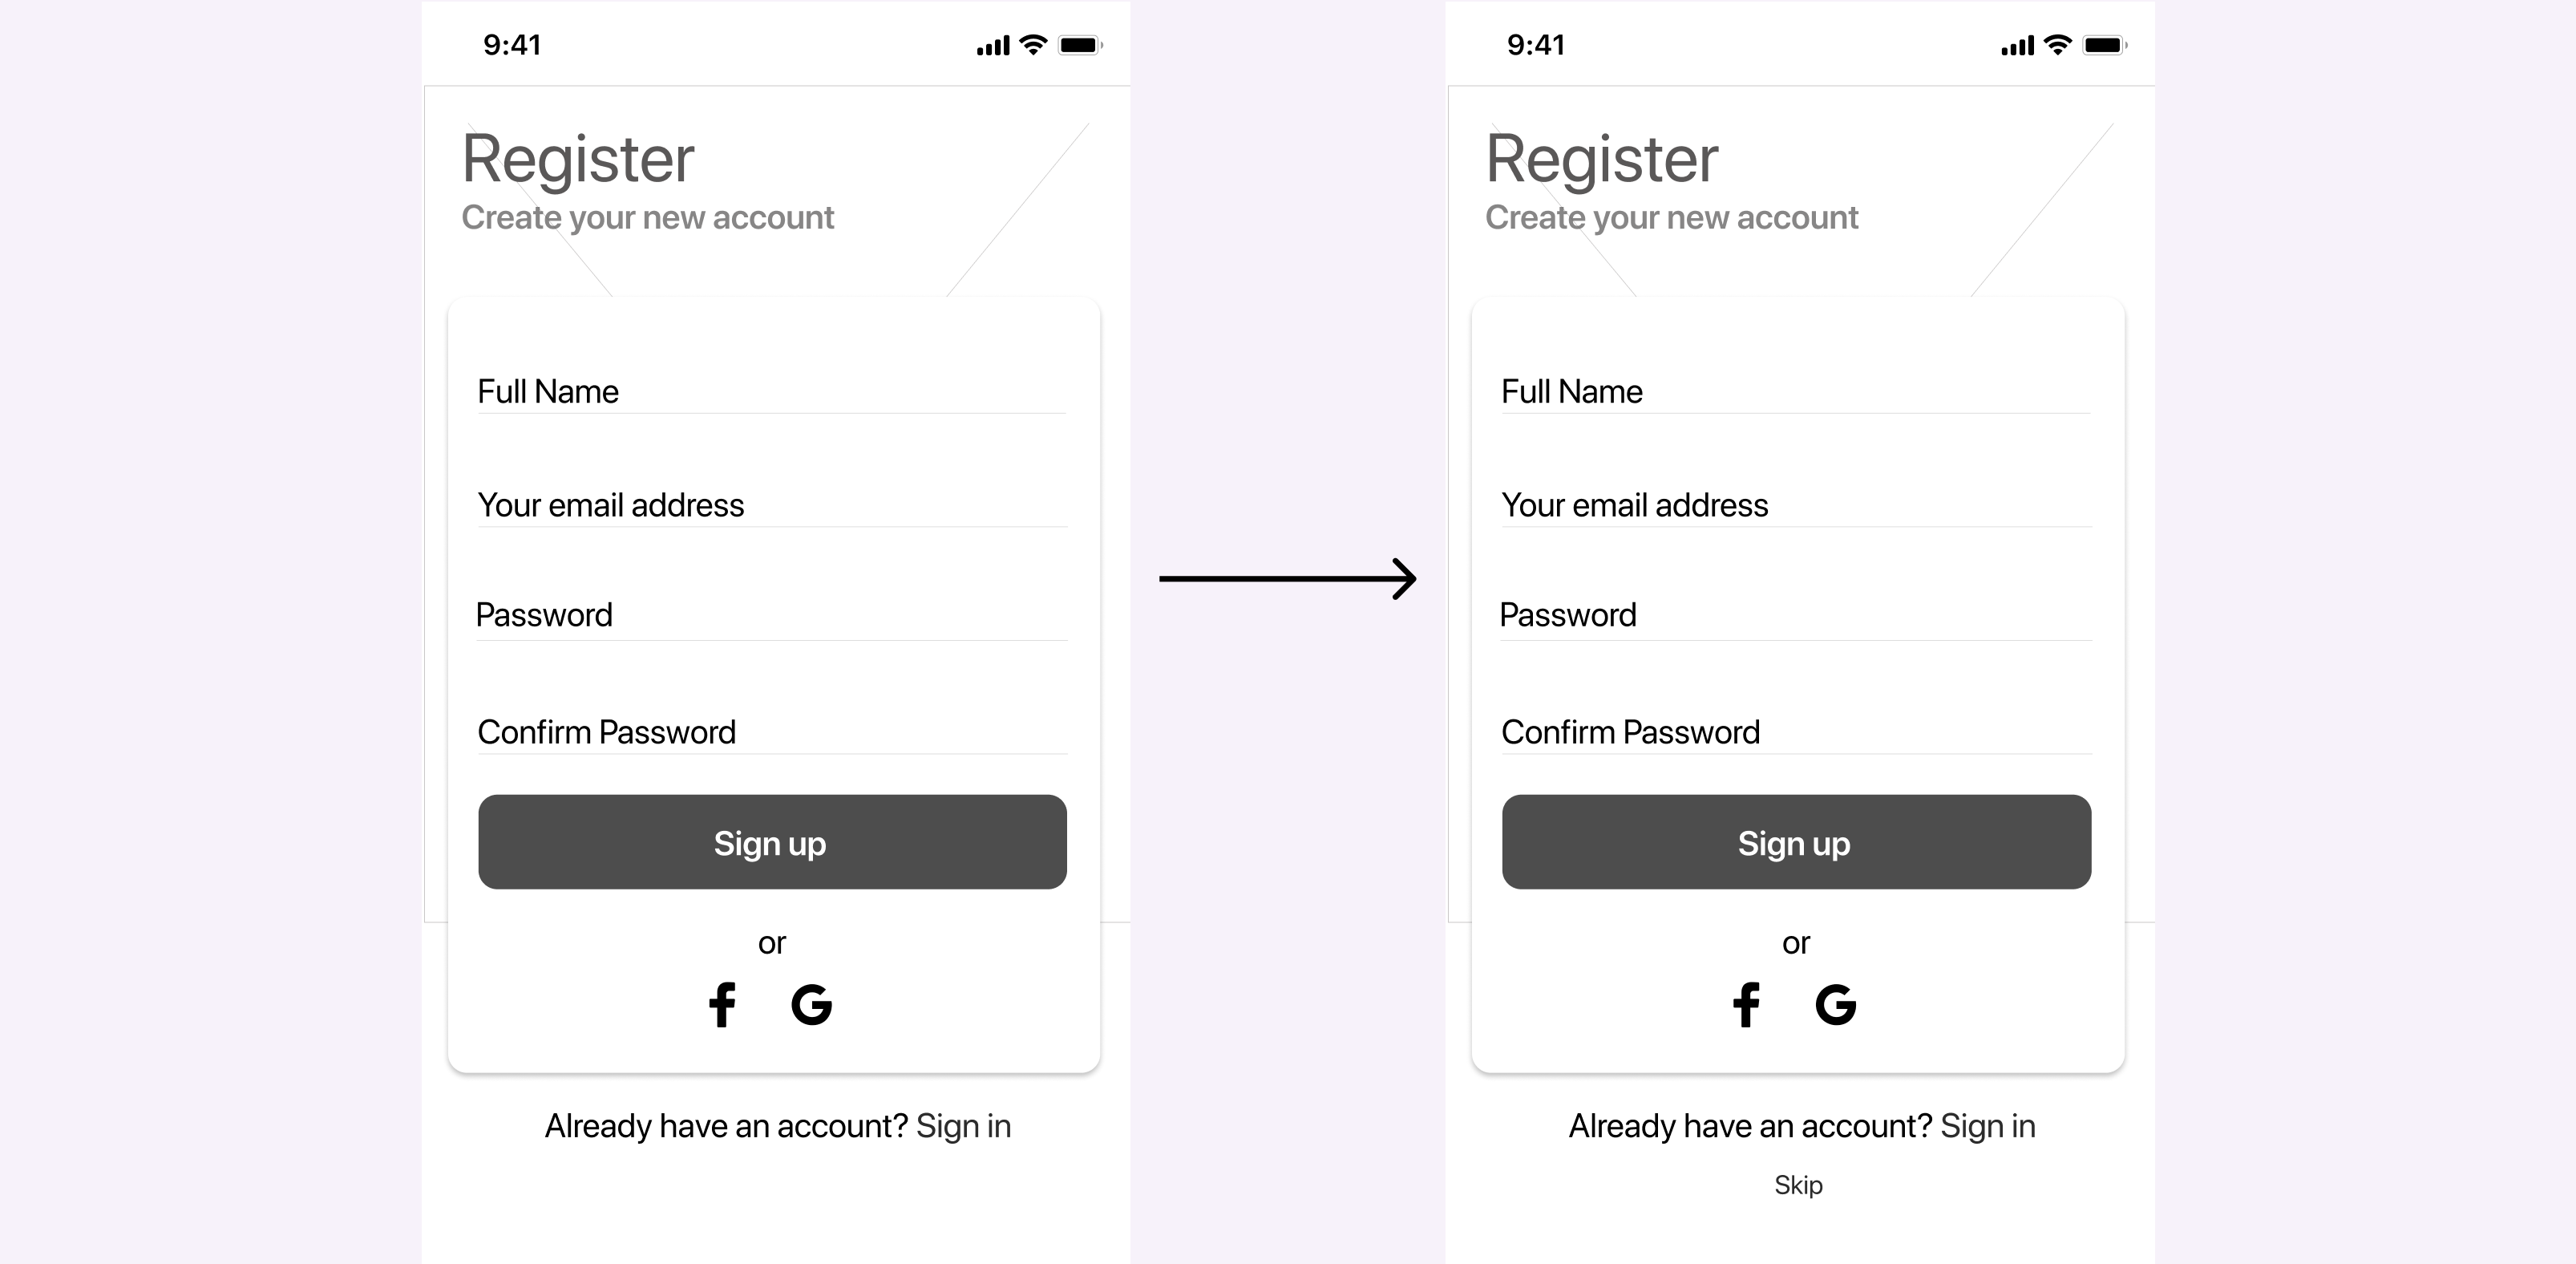 Wireframe showing the initial signup screen
                 and the iterated signup screen where skip option has been added.